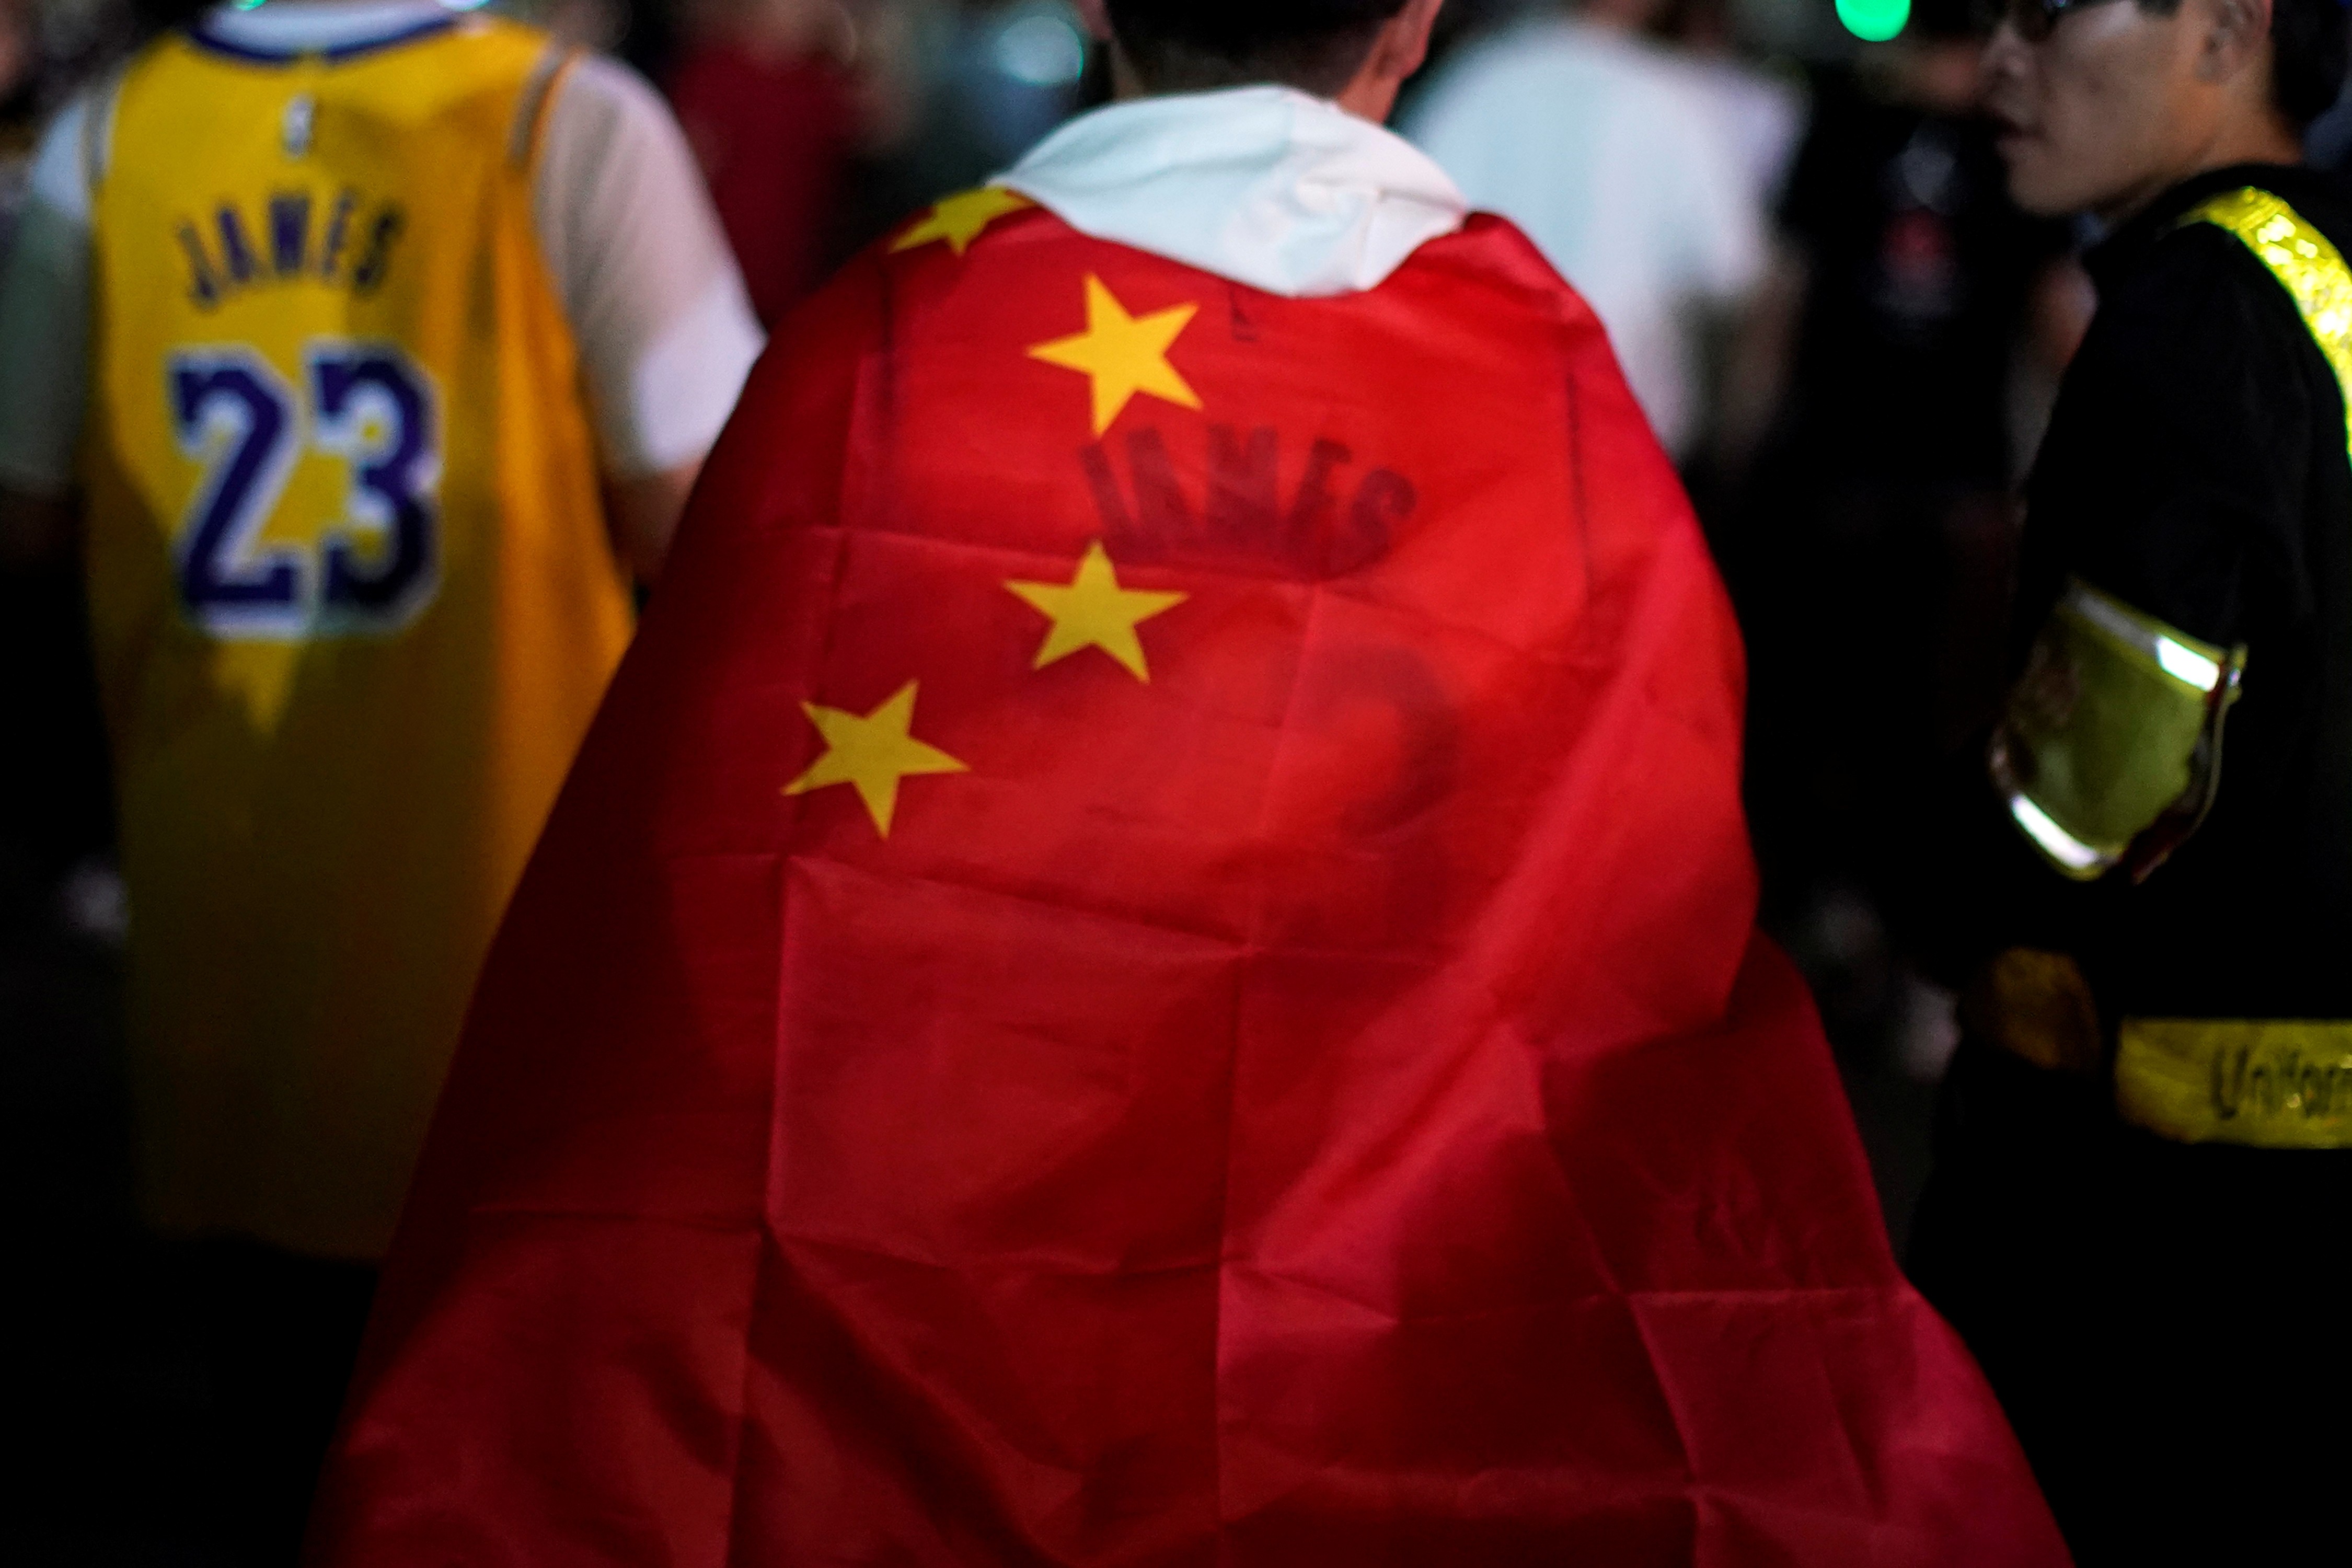 A man wearing a LeBron James jersey wraps himself in a Chinese national flag outside the Mercedes-Benz Arena before the NBA exhibition game between the Brooklyn Nets and Los Angeles Lakers in Shanghai on October 10. Photo: Reuters